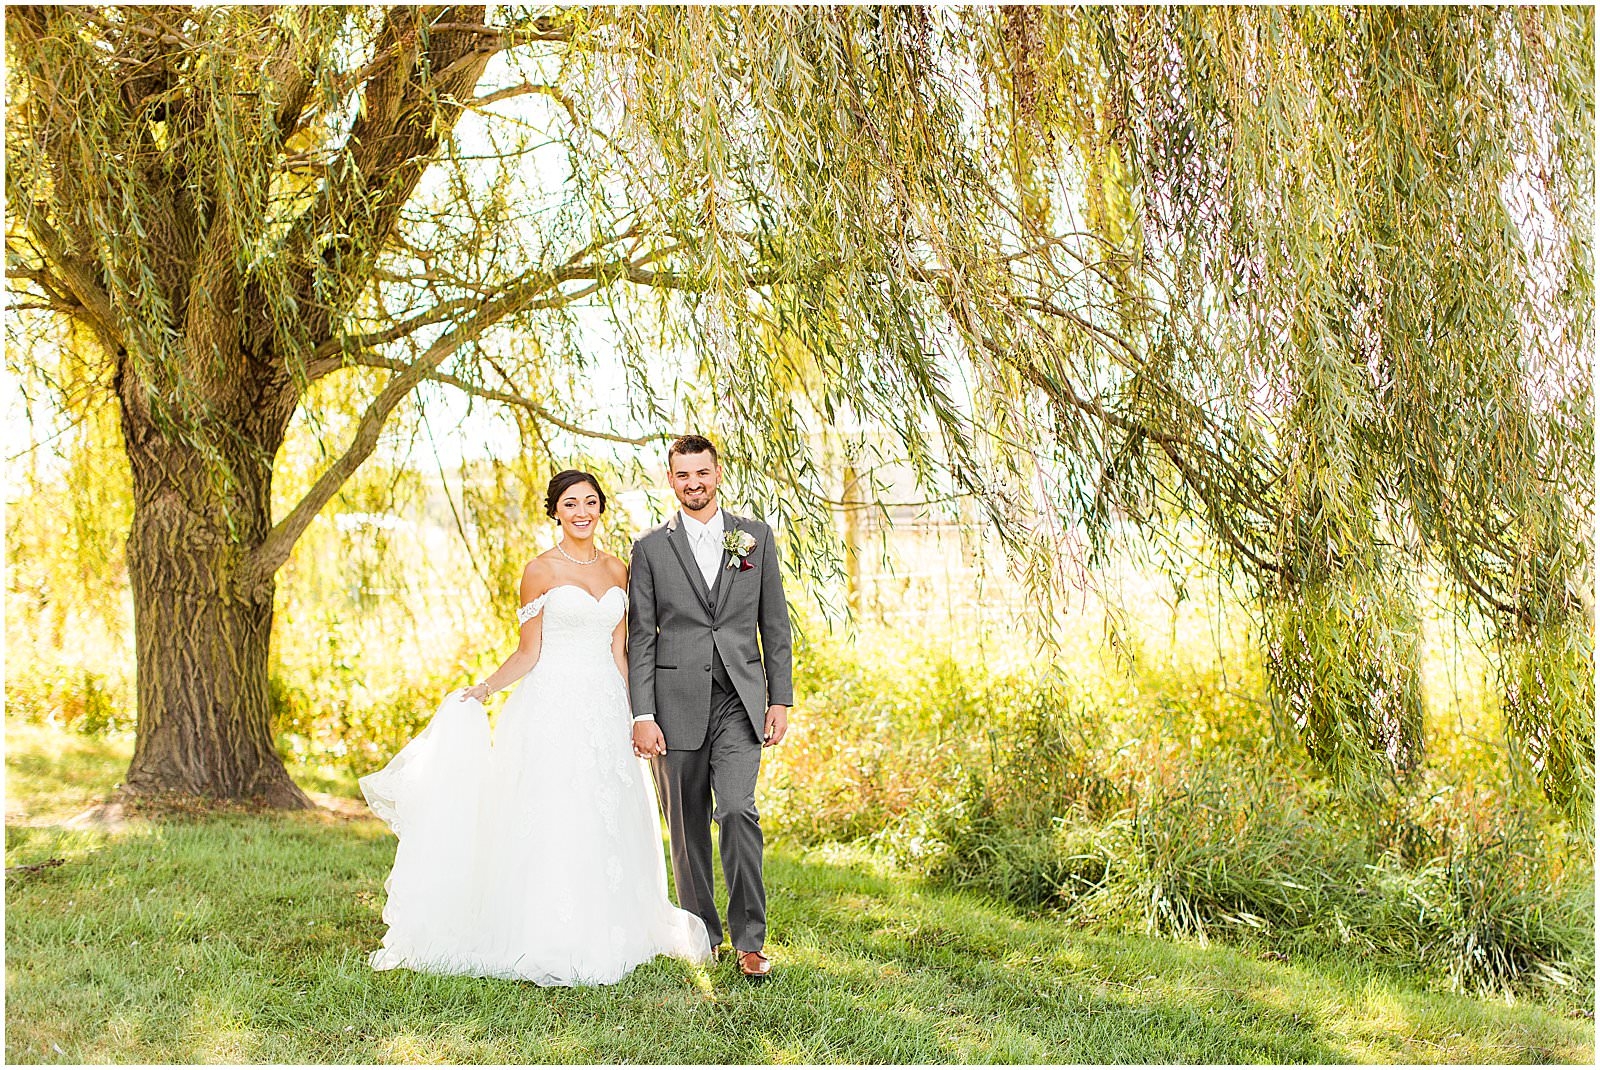 A Stunning Fall Wedding in Indianapolis, IN |. Sally and Andrew | Bret and Brandie Photography 0068.jpg